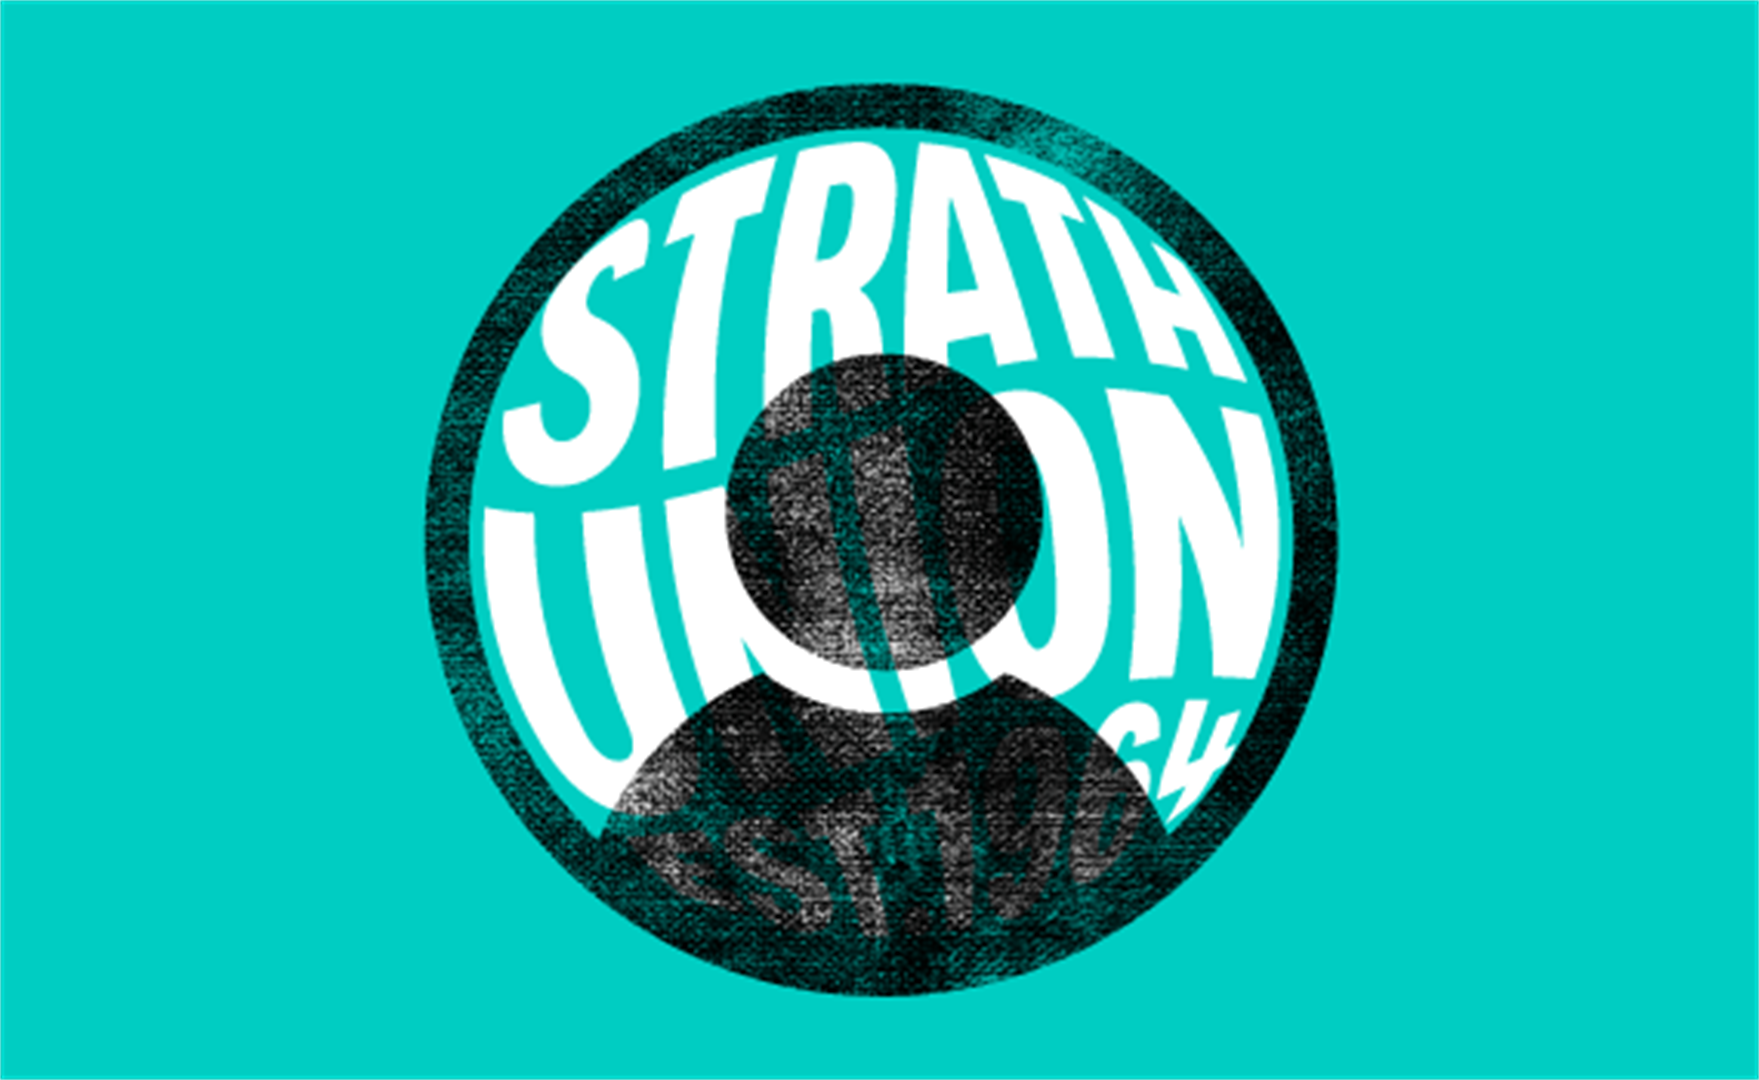 The Board of Trustees is responsible for the management and administration of Strath Union.